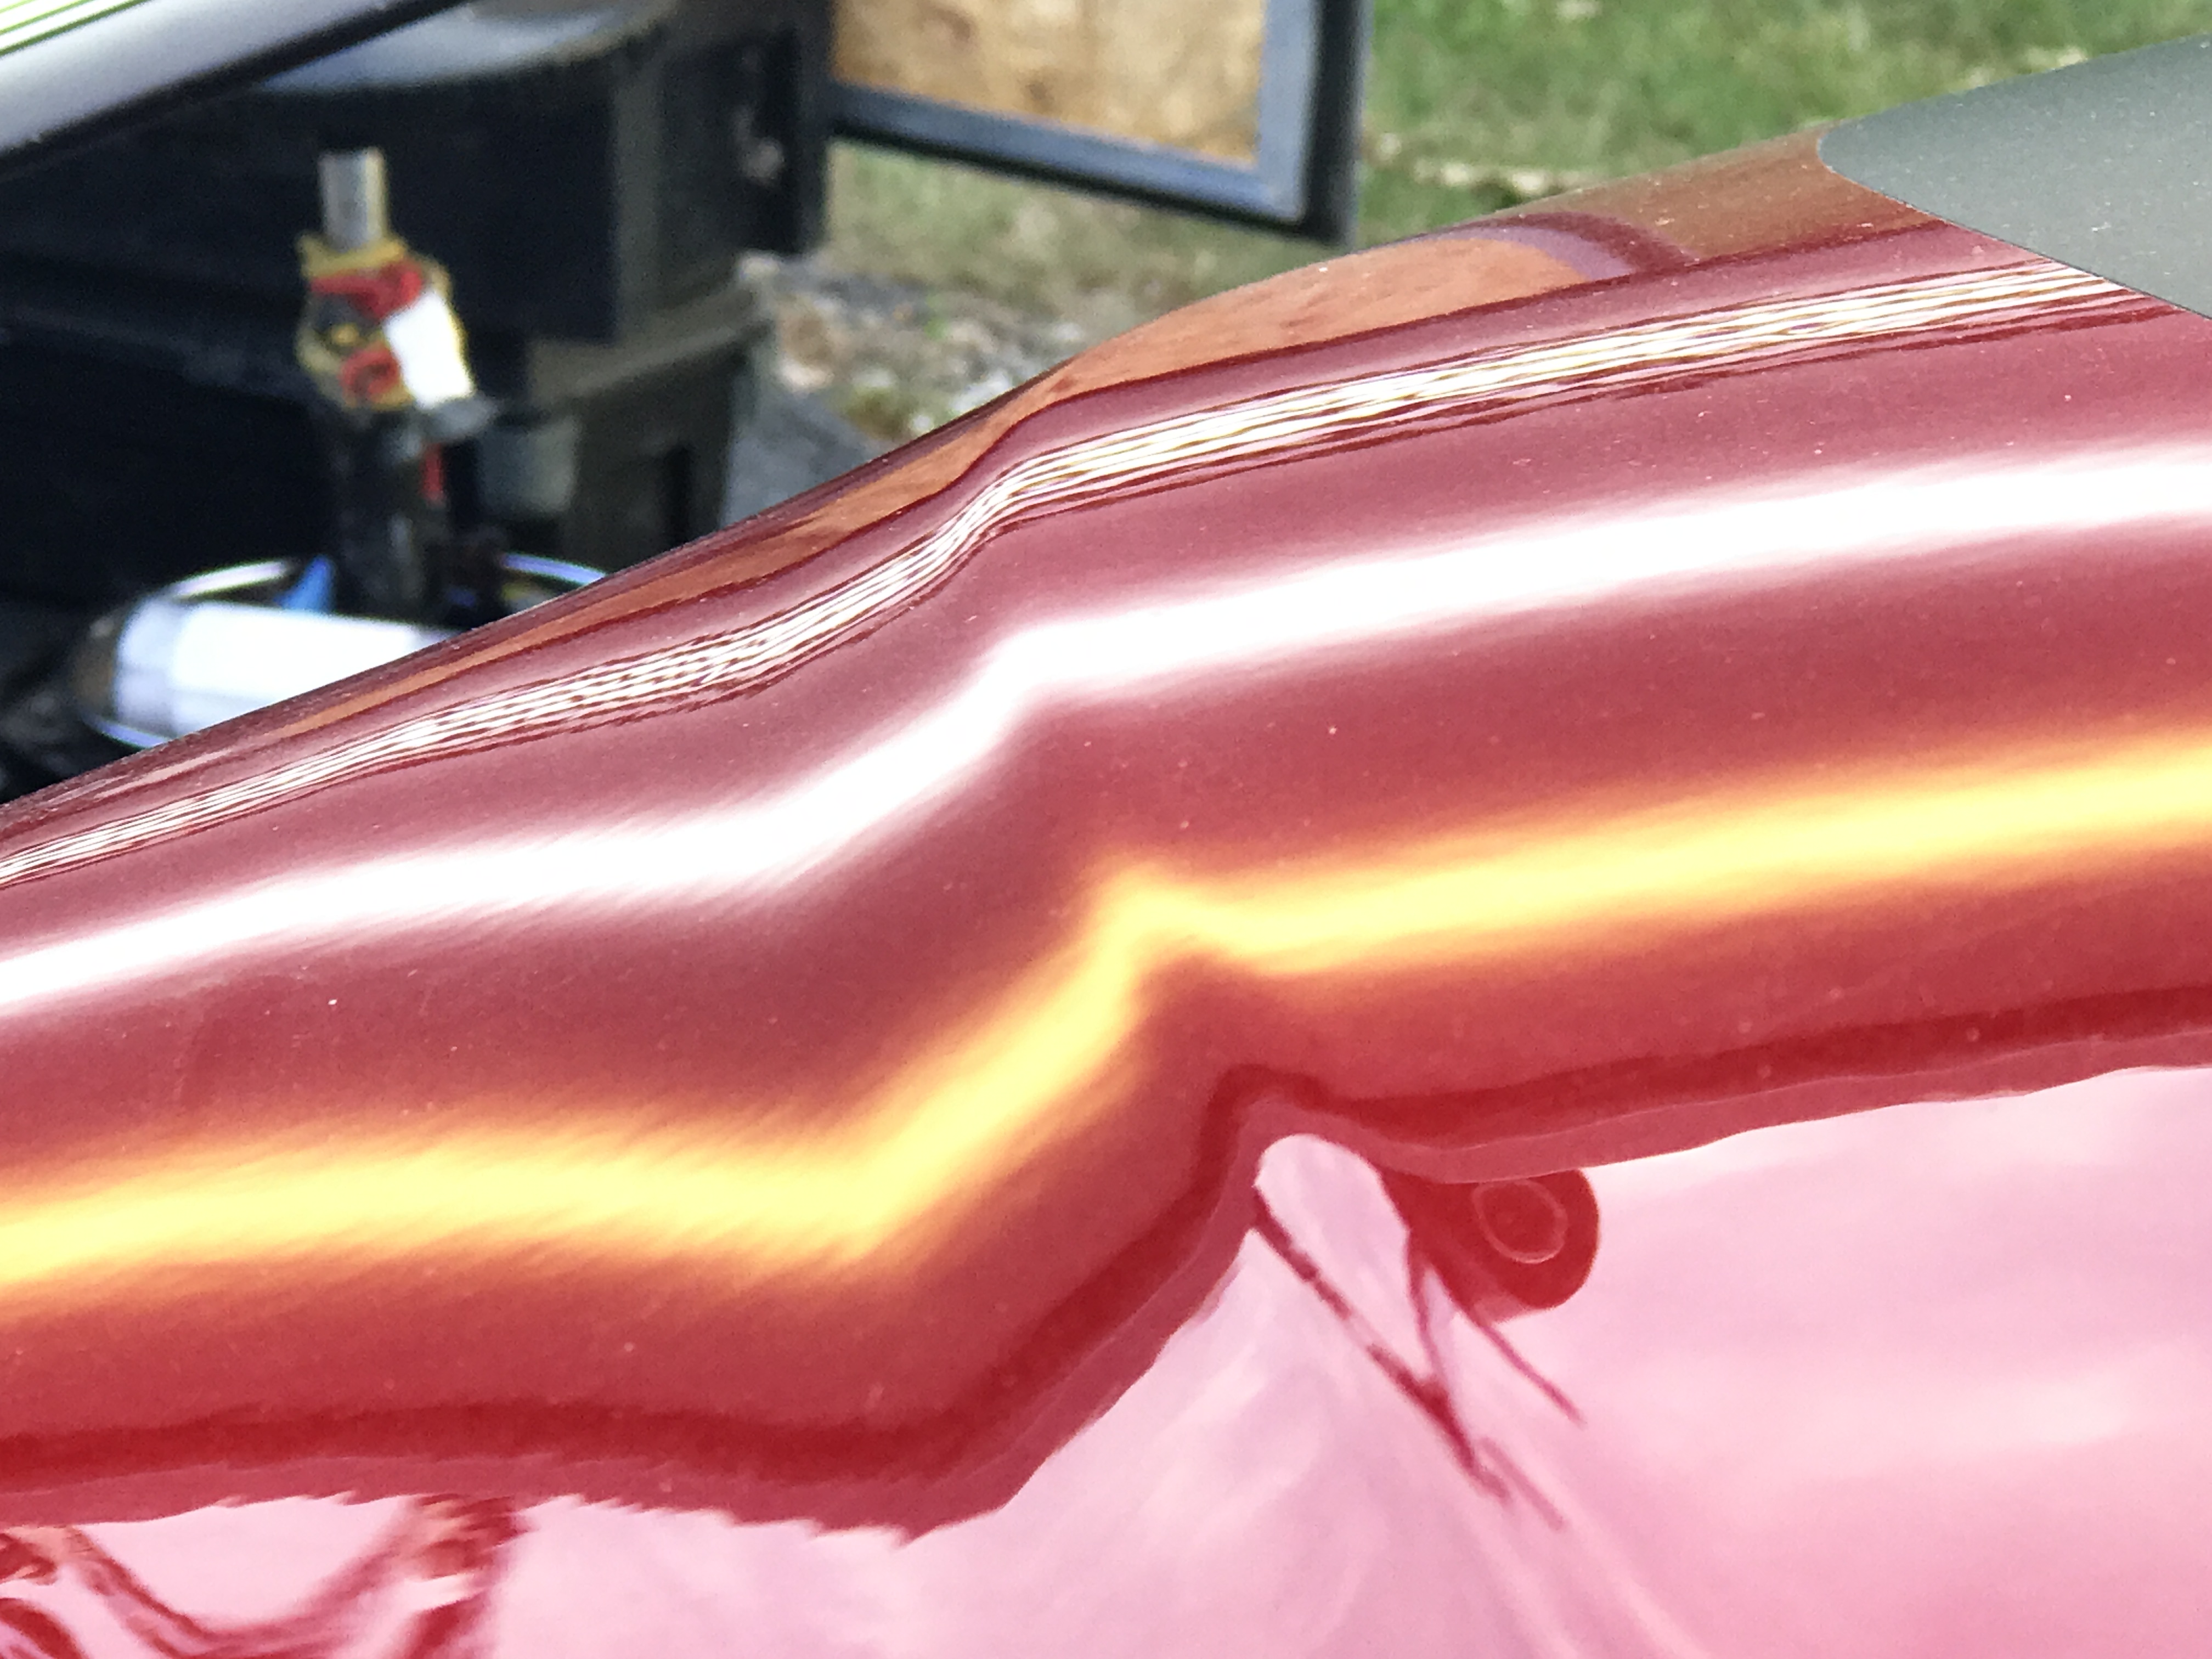 2017 Jeep Grand Cherokee Trailhawk New Vehicel dent removal, this is the before image. Michael was called in to remove this dent at a dealership, to maintain value and to maintain the vehicle's original paint.. http://217dent.com Serving Springfield, Decatur, Taylorville, and surrounding areas. (After Image)